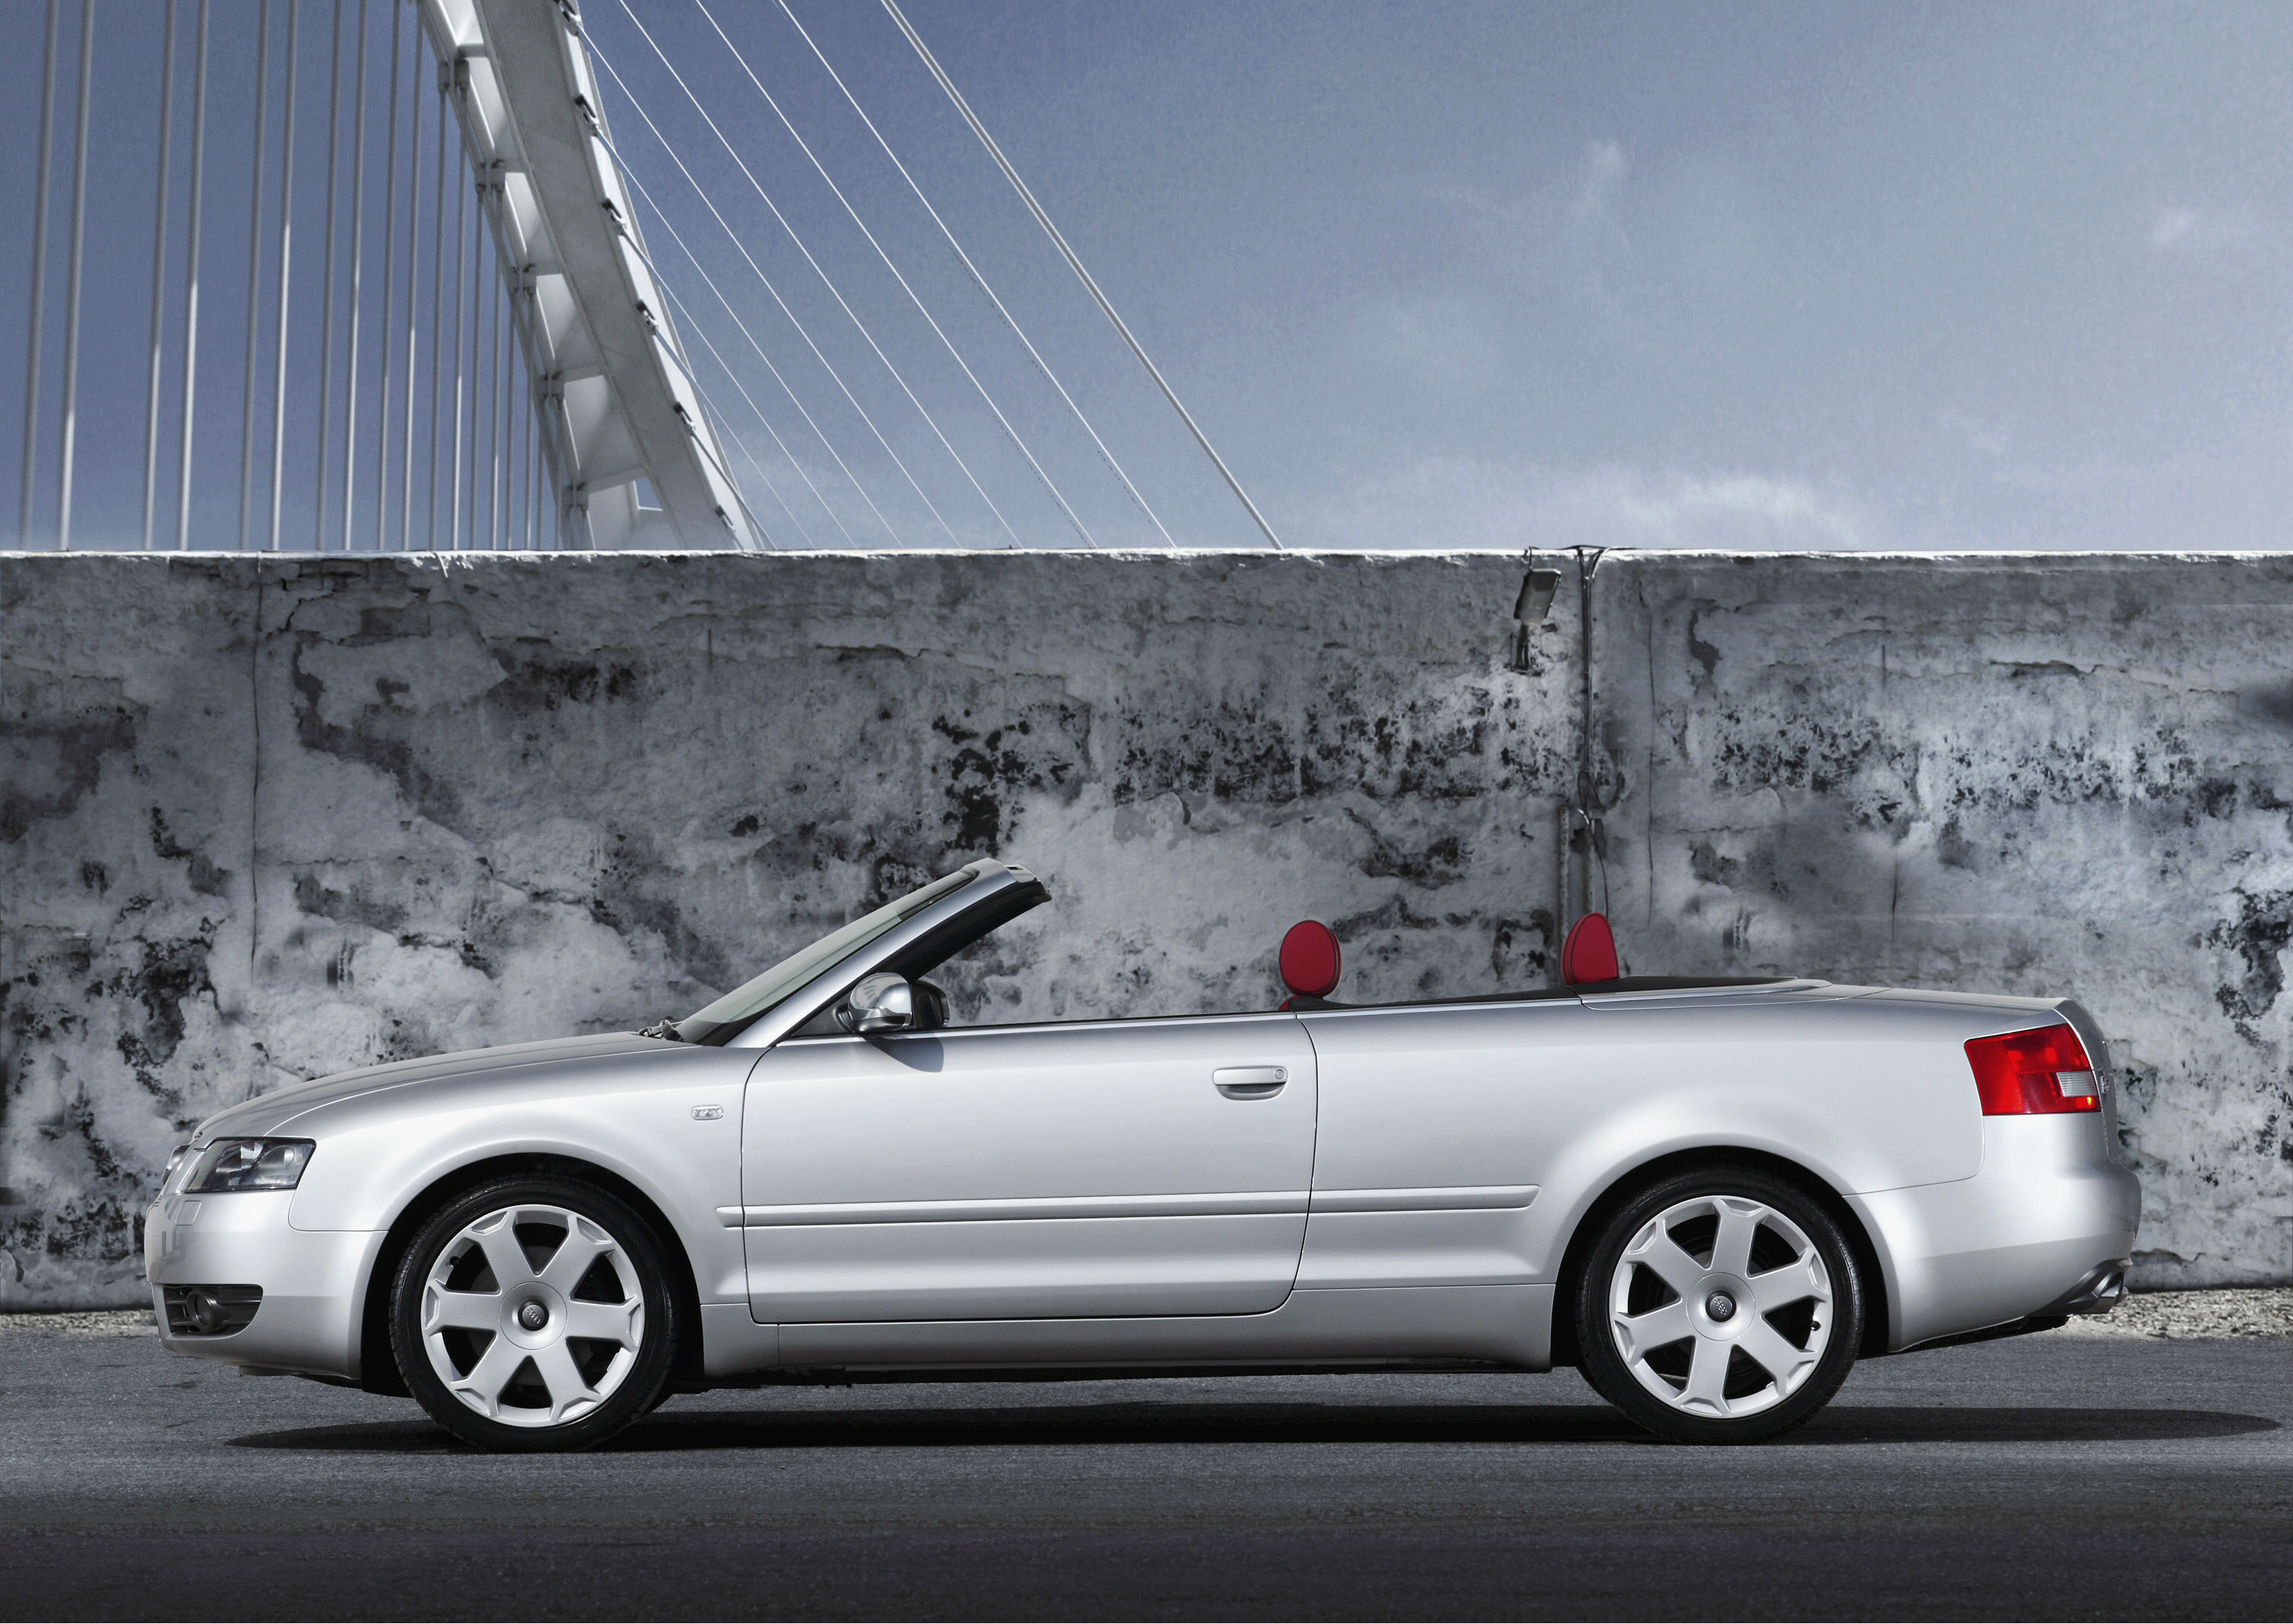 Buying guide: fantastically fun £6000 used cars, including the Audi S4 cabriolet